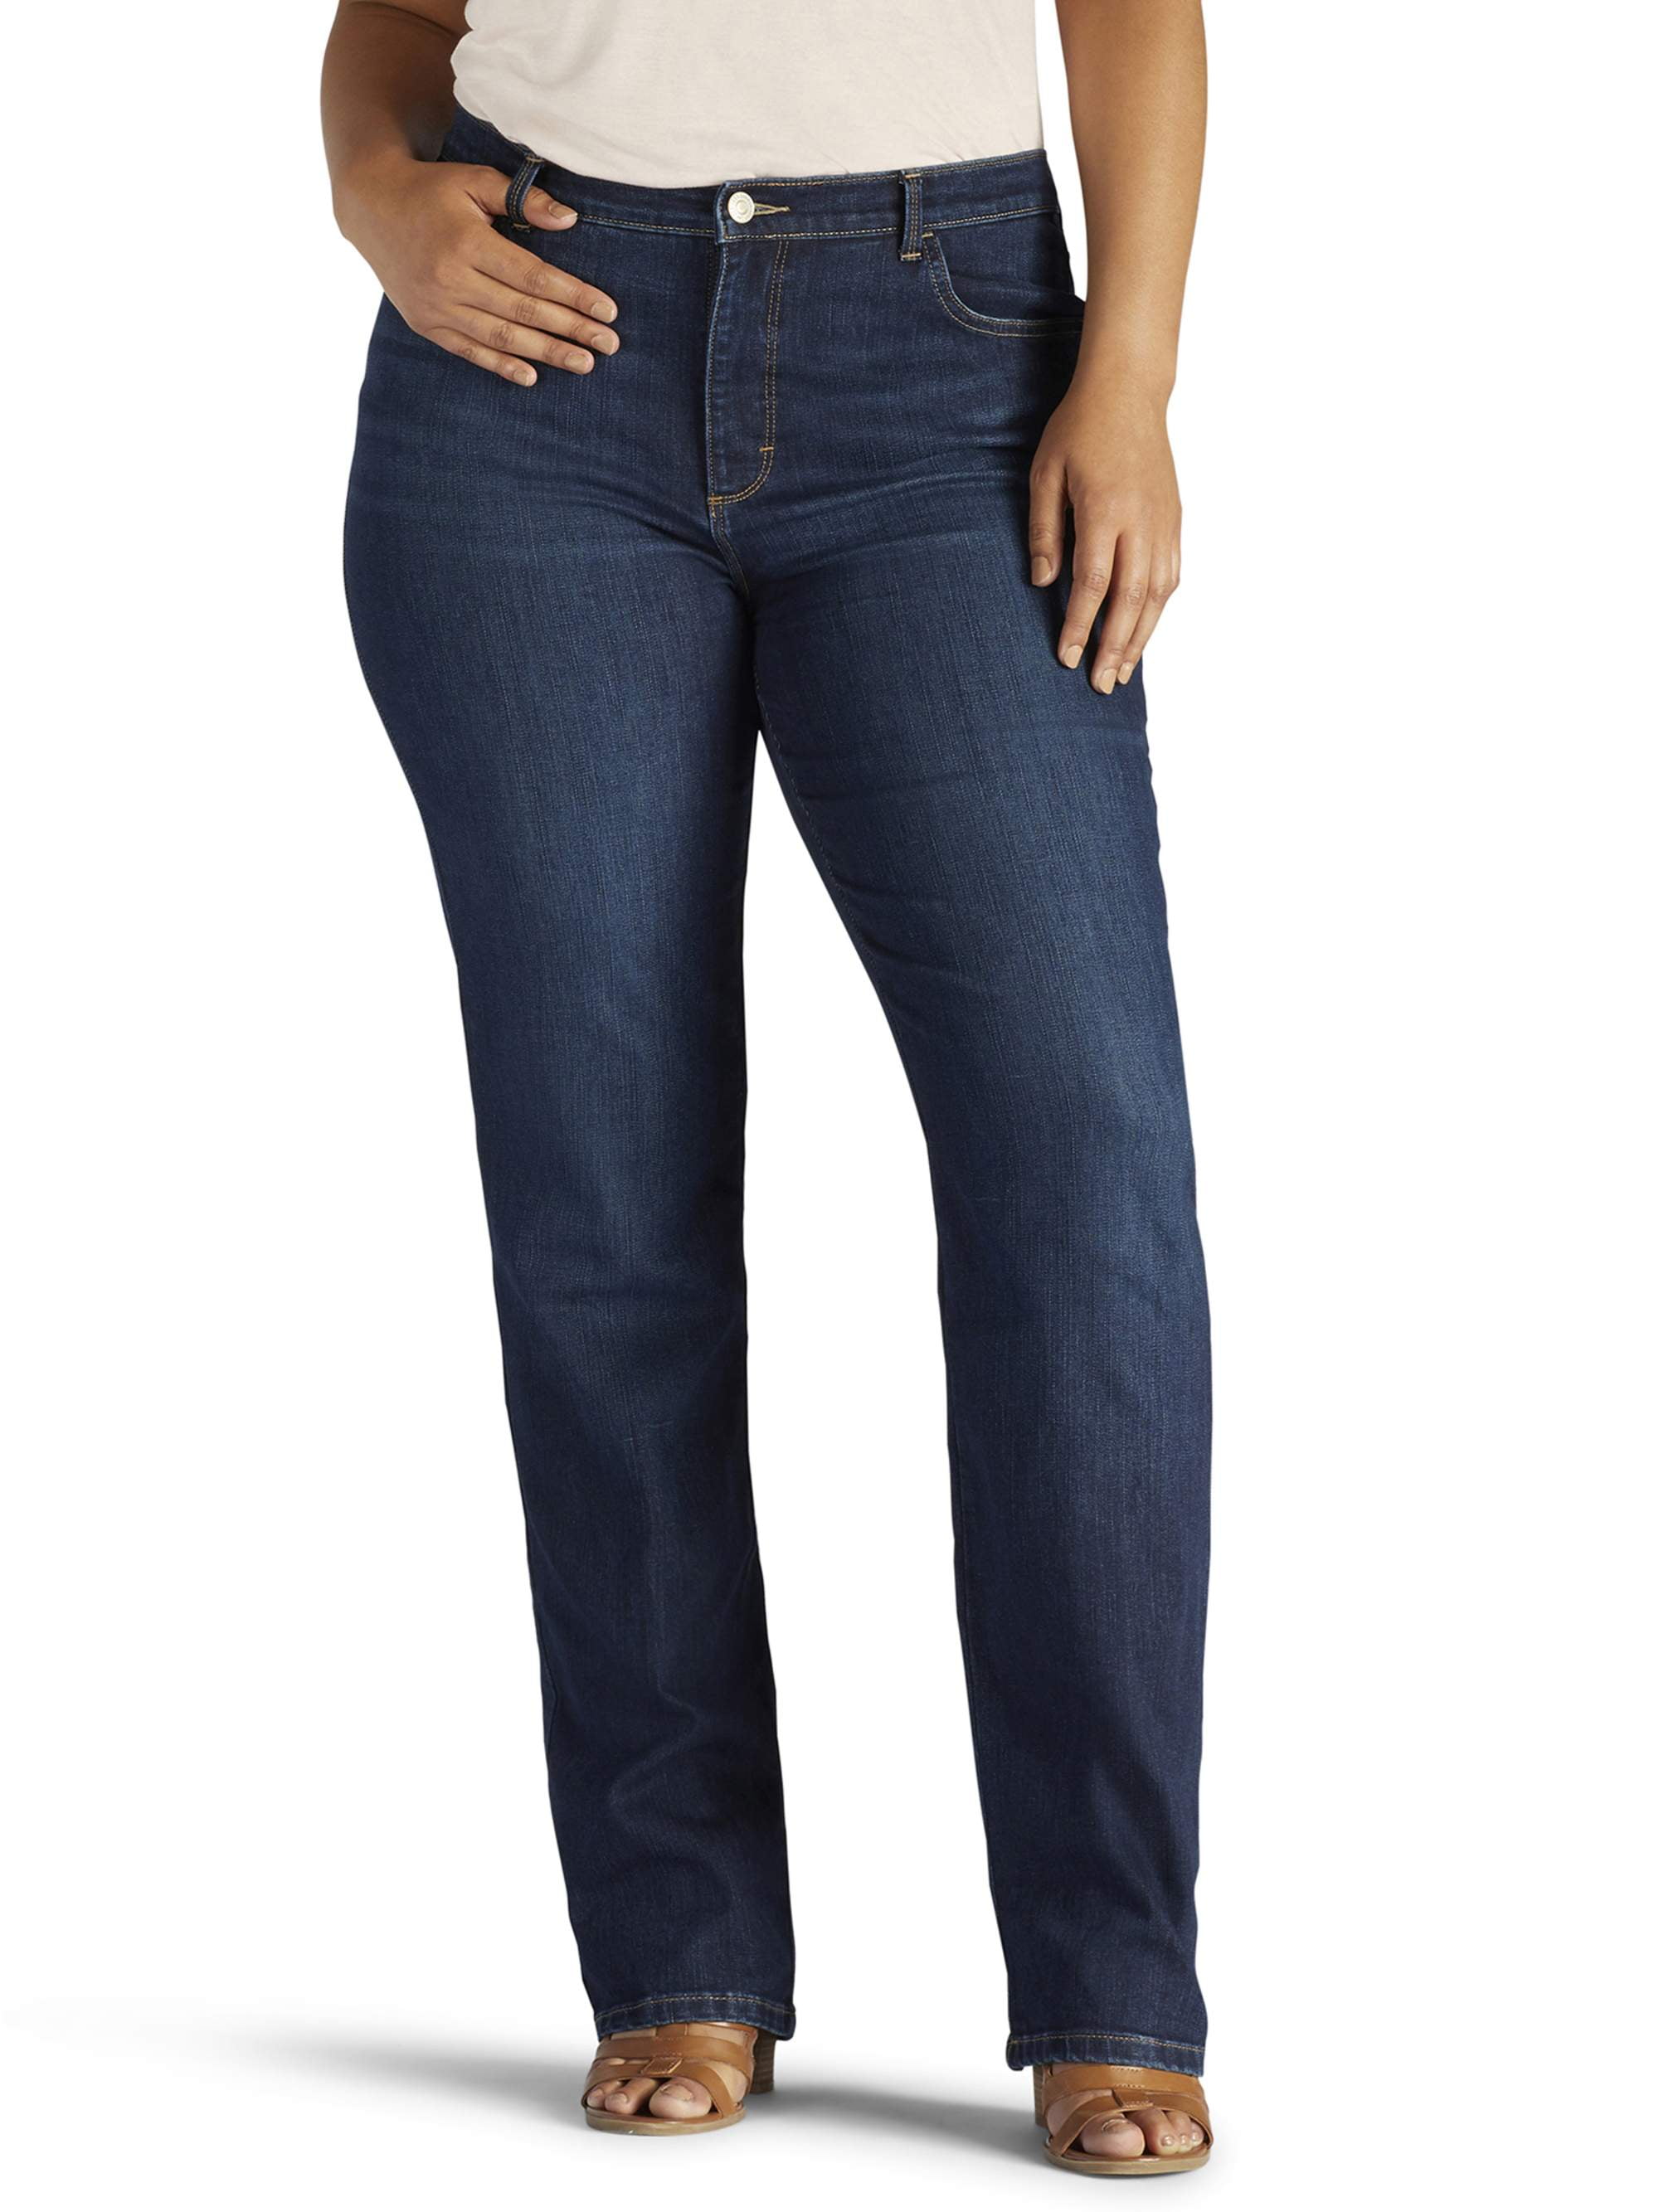 Plus Instantly Slims Relaxed Fit Straight Leg Jean Walmart.com